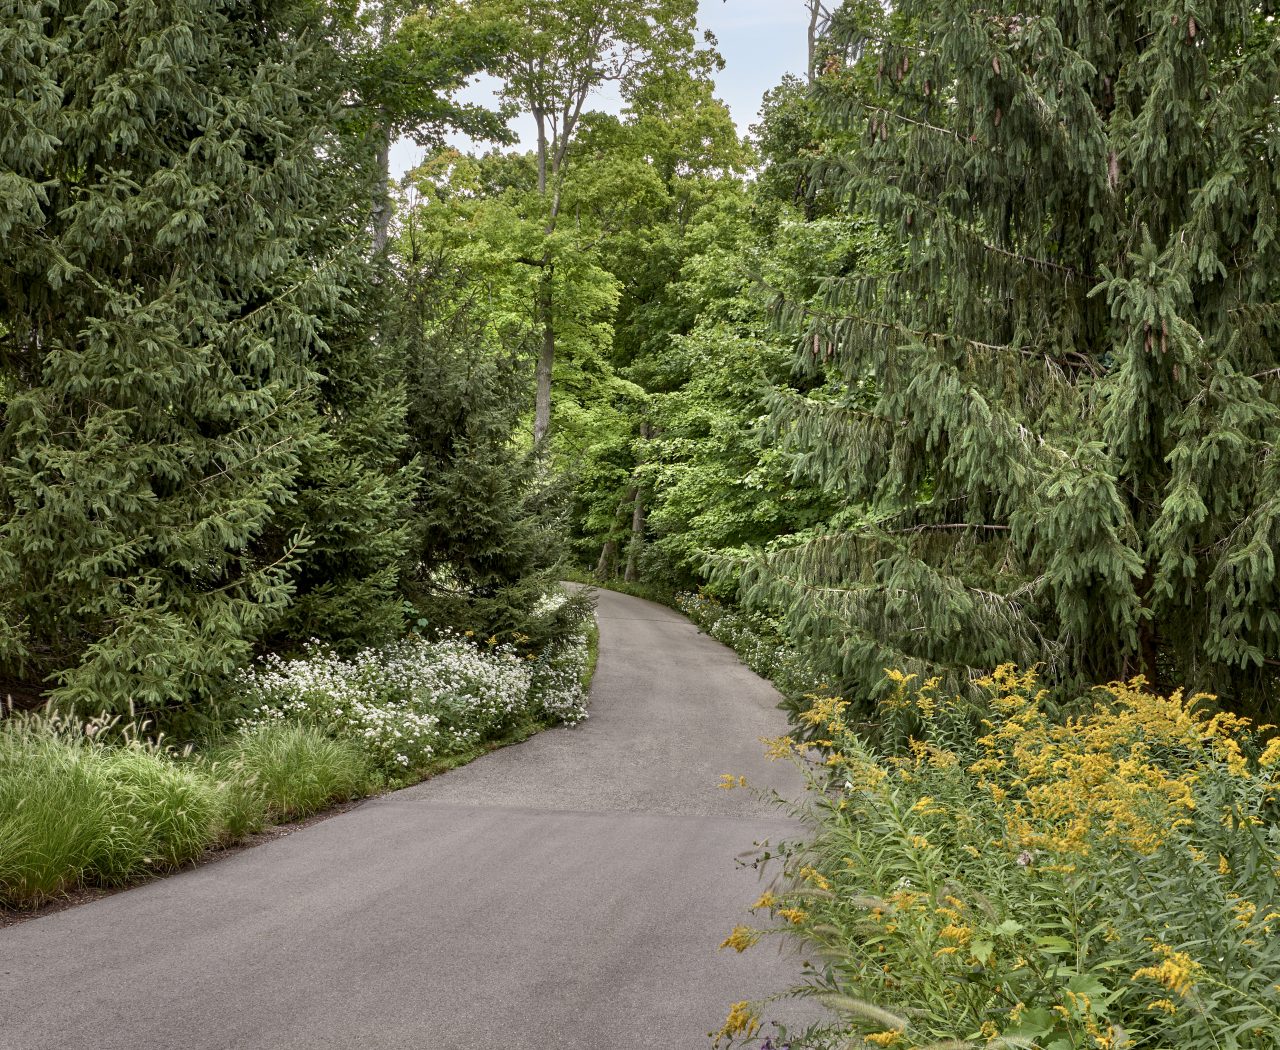 Driveway with perennials and natural surroundings